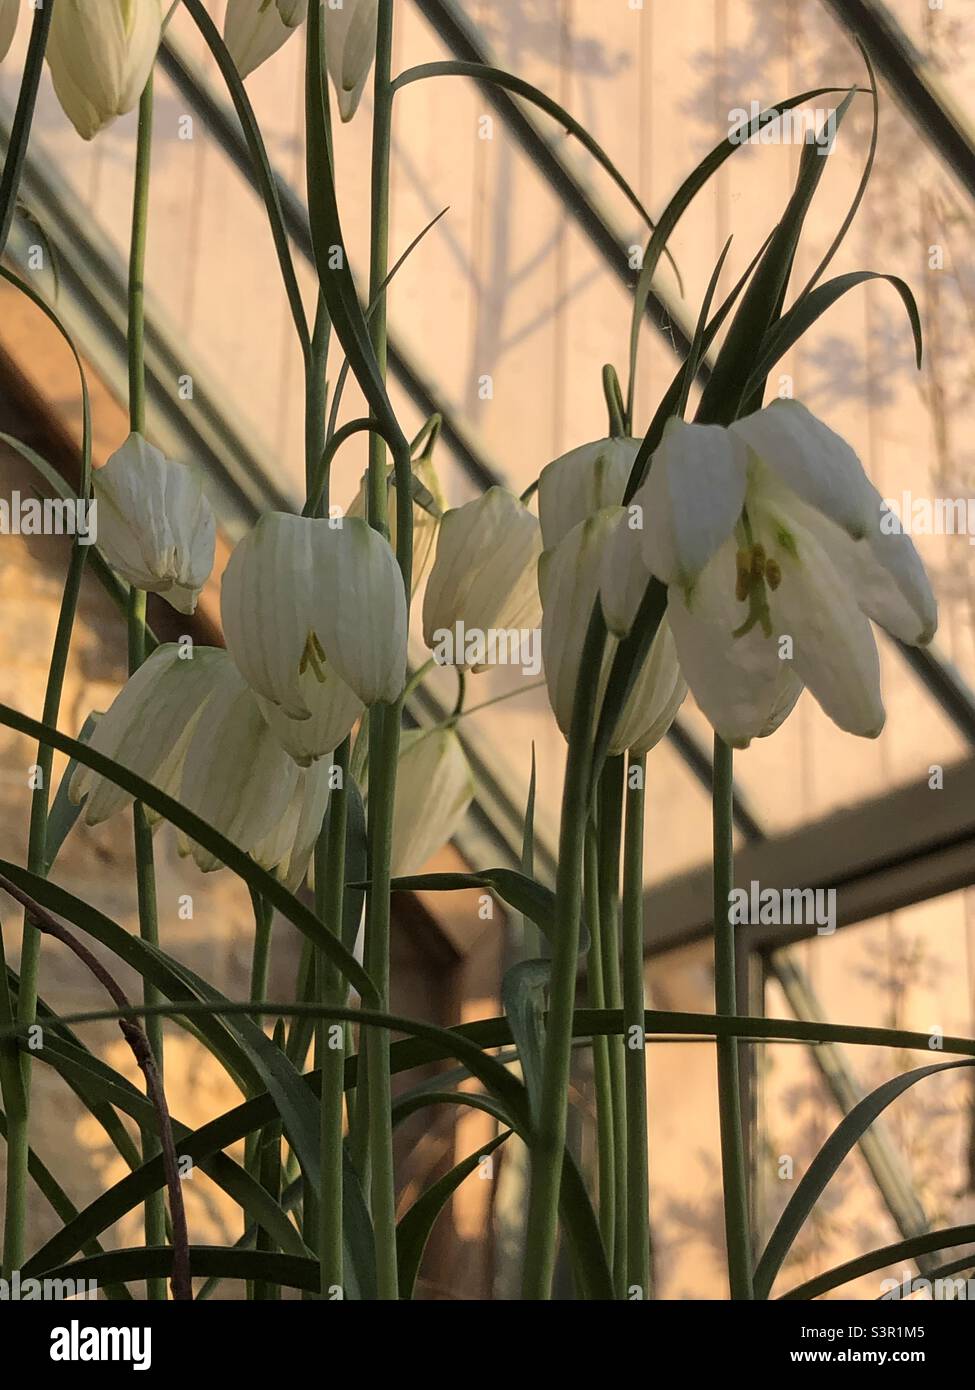 White Fritillary Lilly in bloom with a back ground of a spring conservatory illuminated by late afternoon sun. Stock Photo